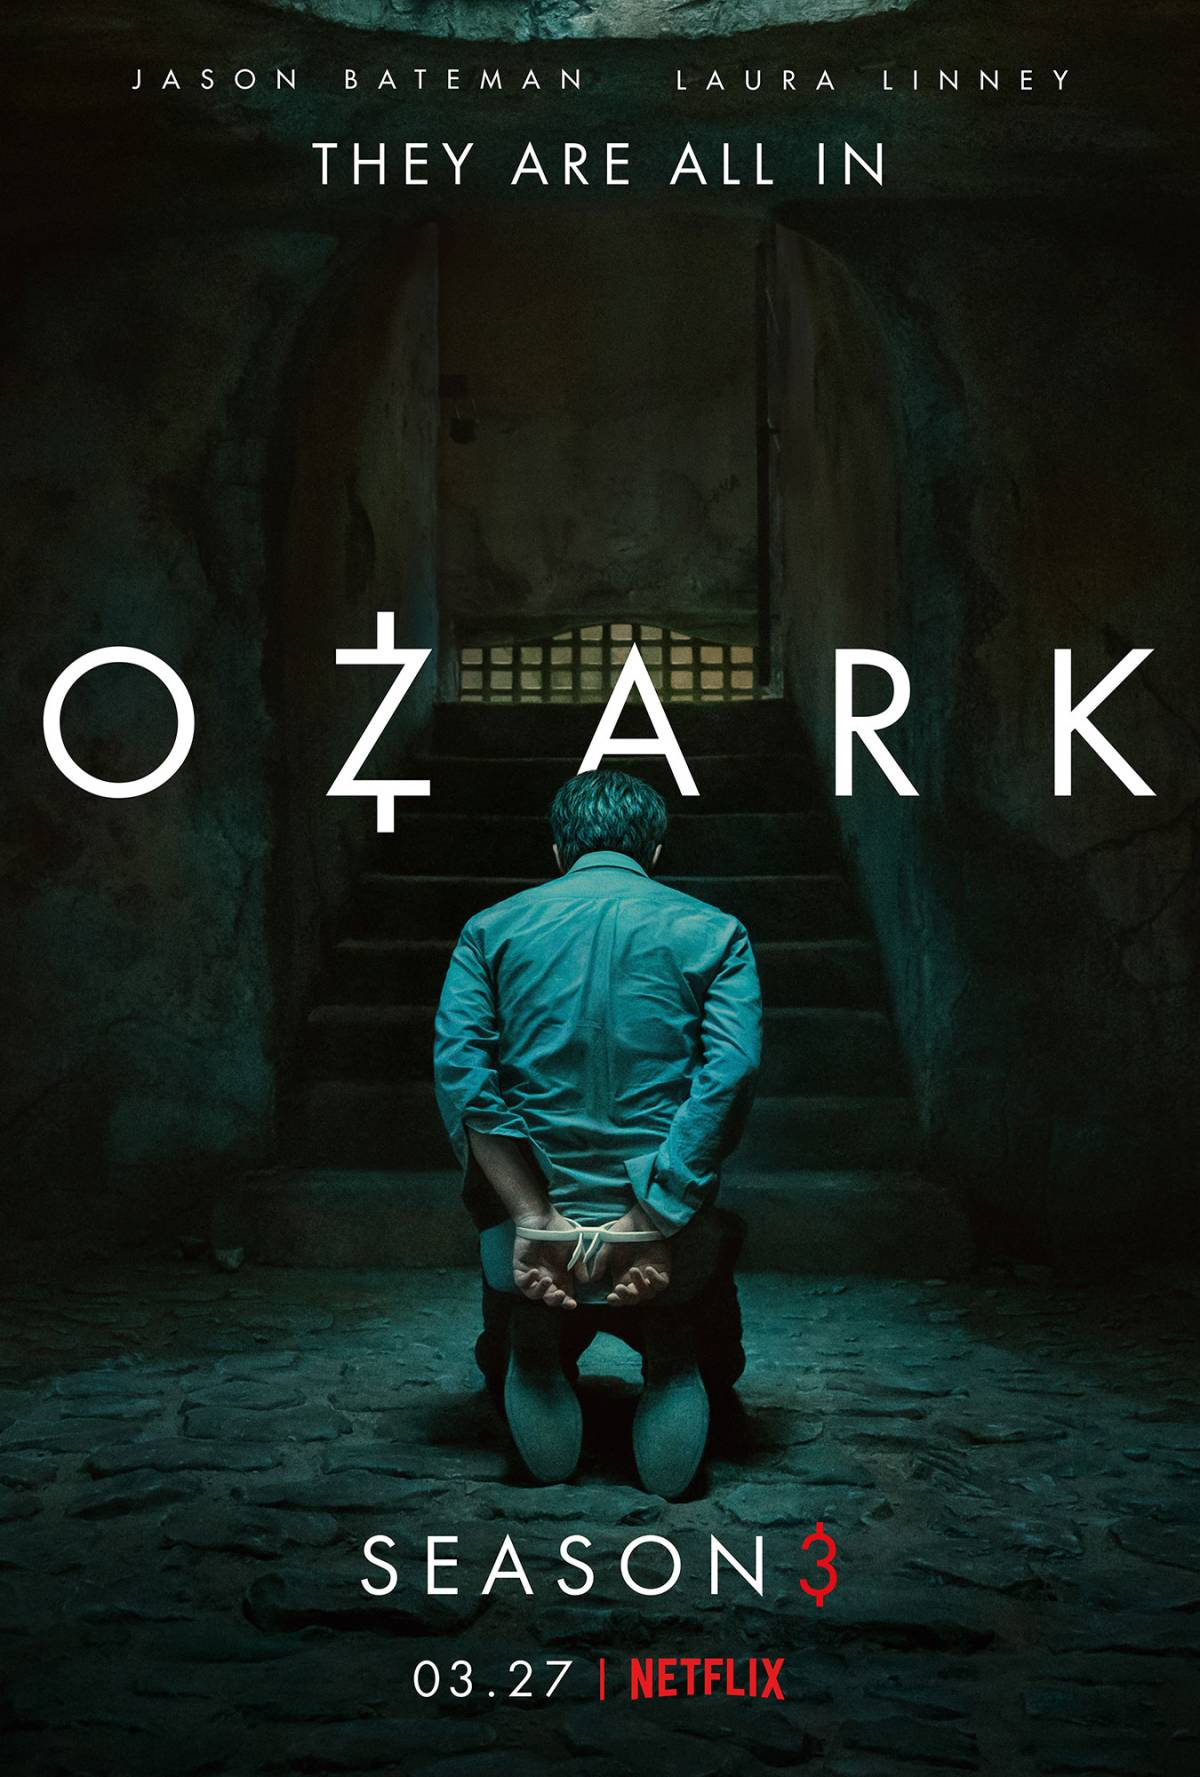 Ozark' Season 4: Everything We Know About the Final Episodes